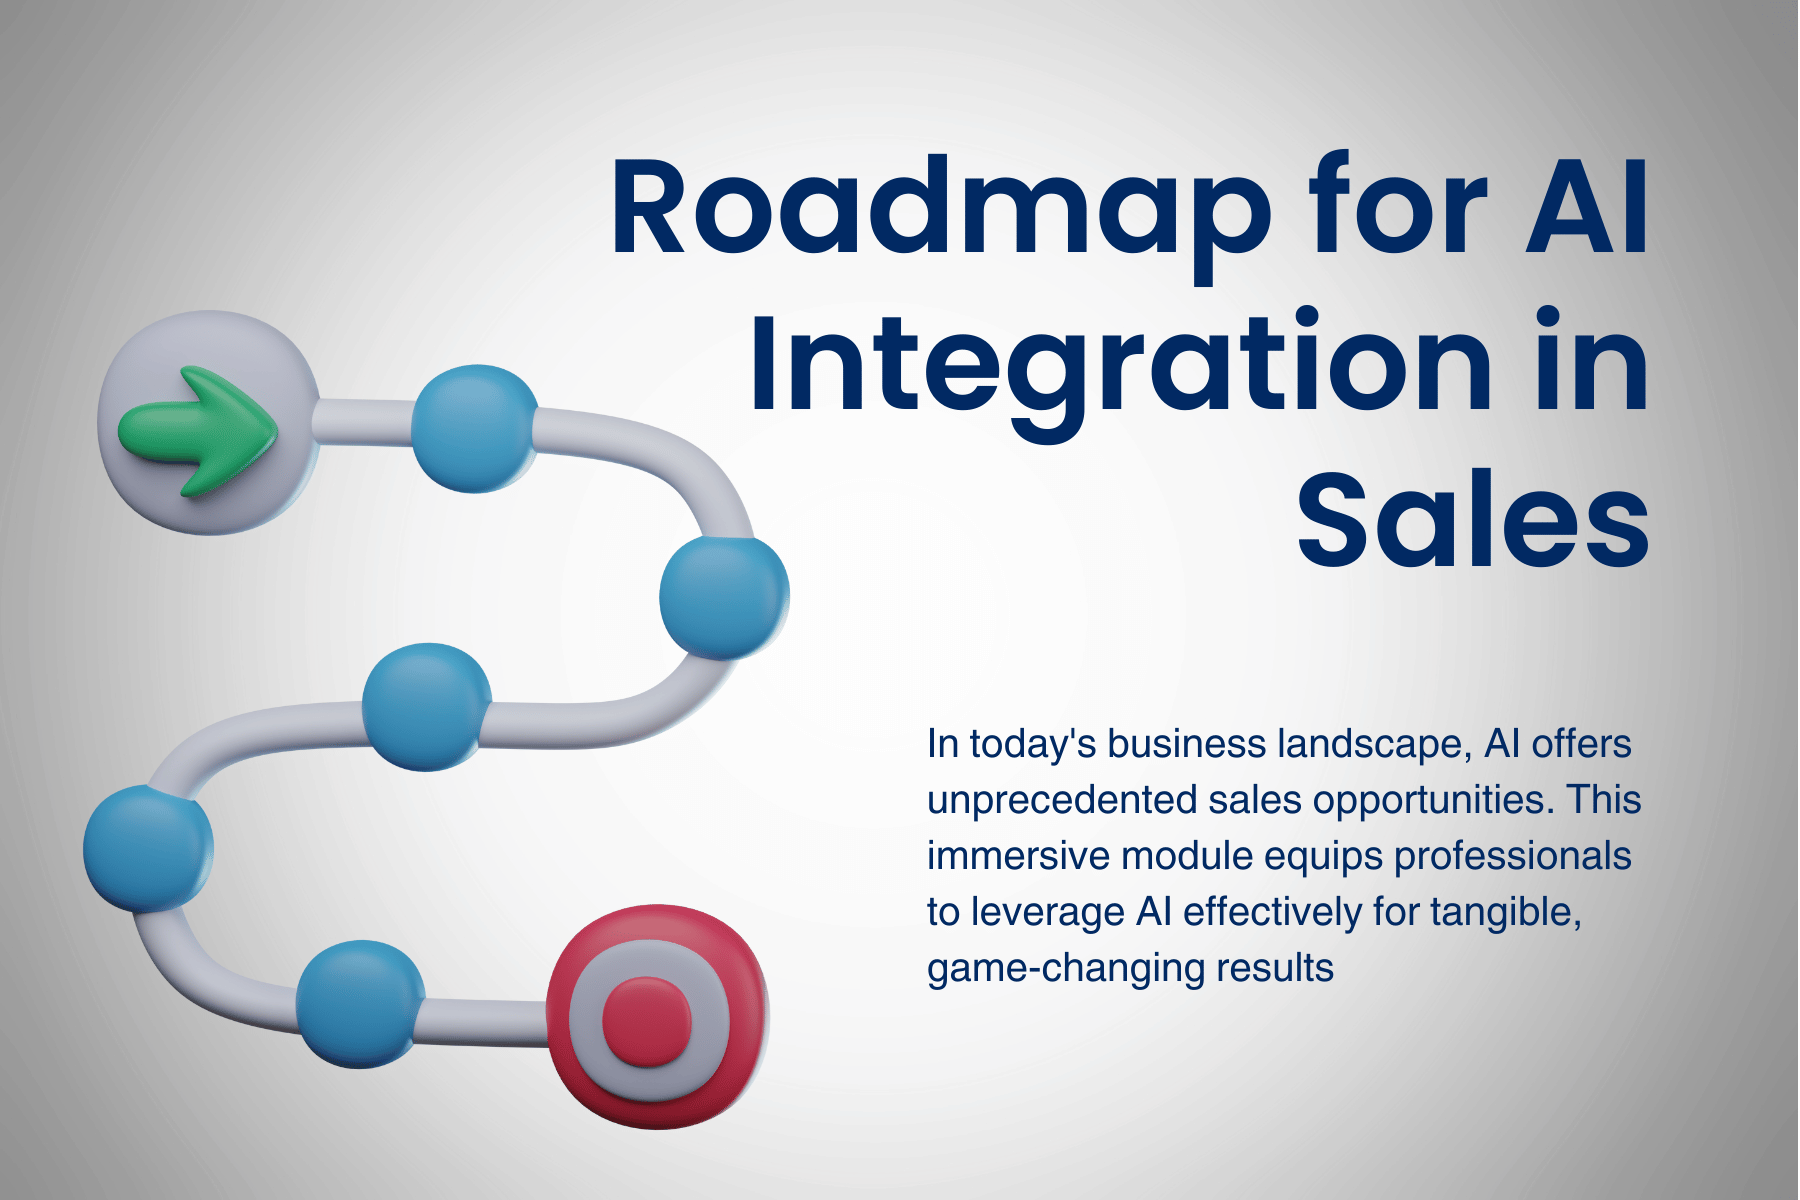 Roadmap for AI Integration in Sales